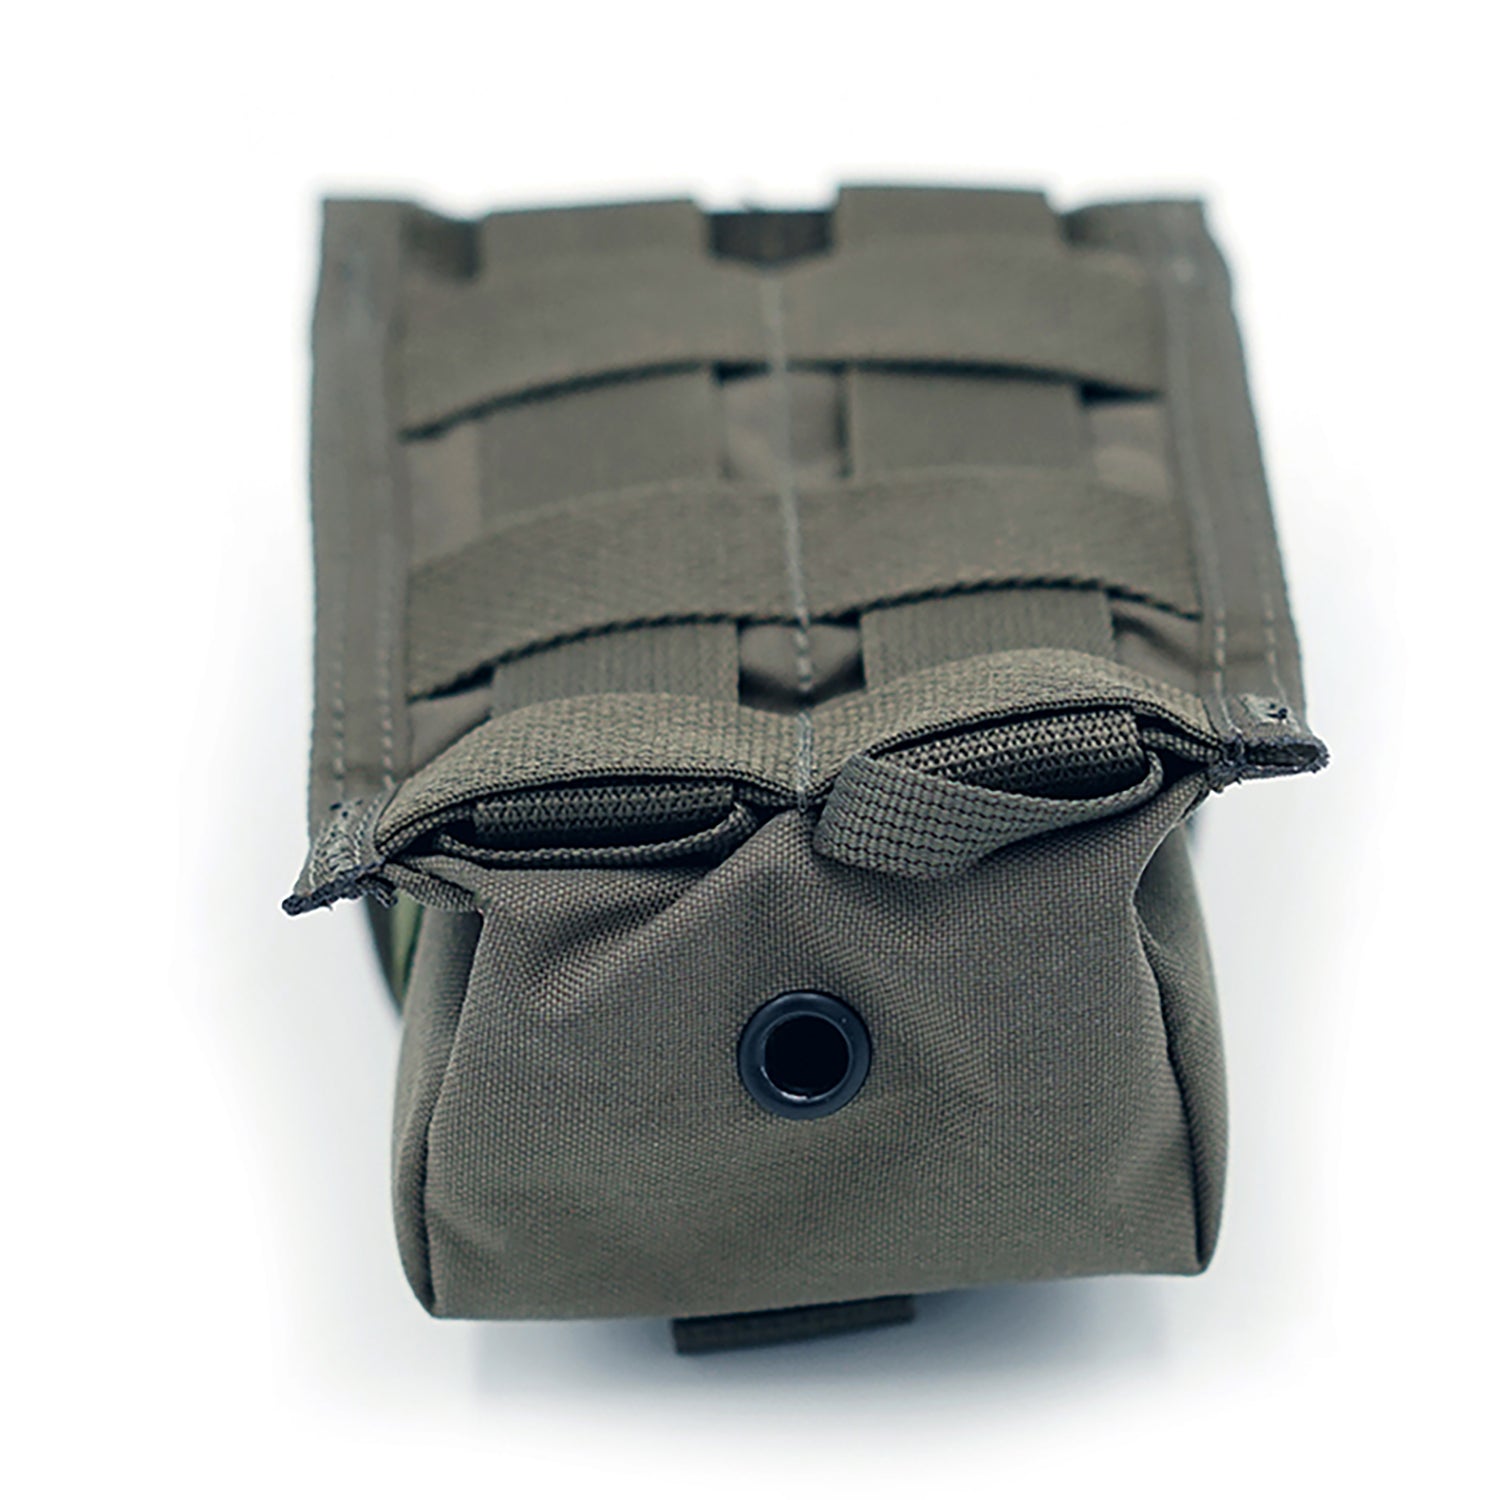 Pre MSA Paraclete style Smoke green tiered SR25 mag pouch